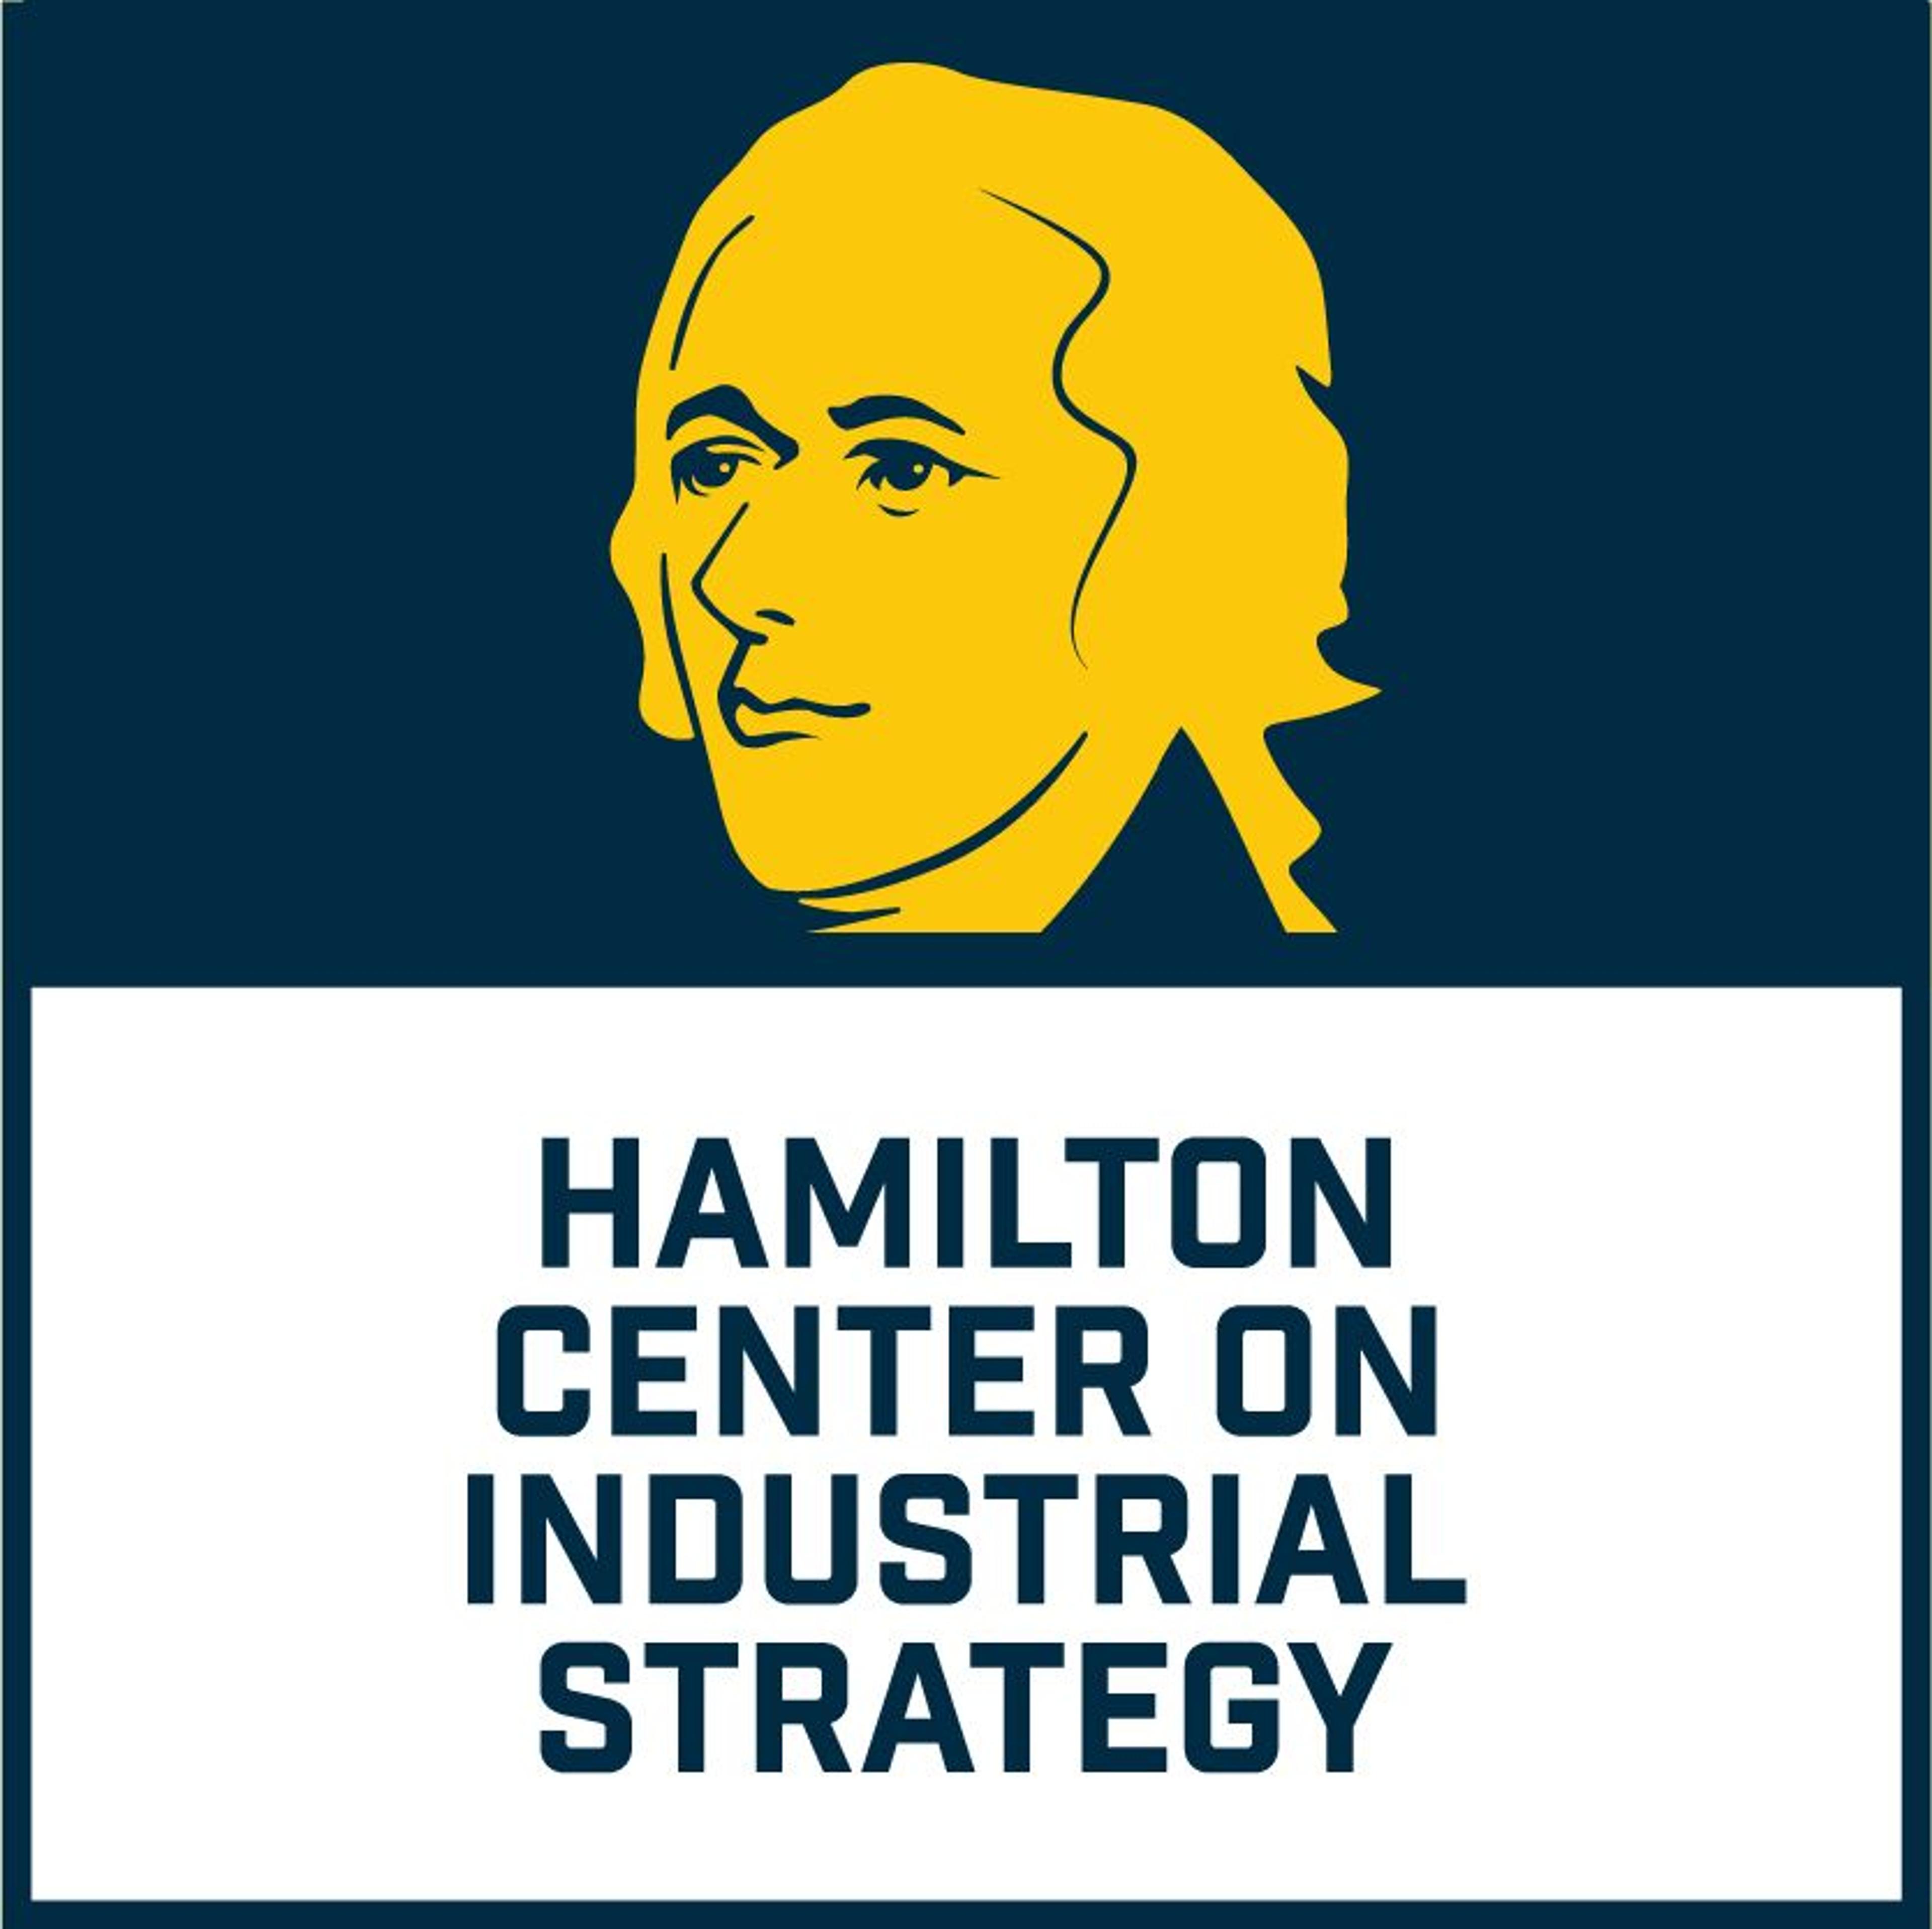 The Hamilton Index: Assessing National Performance in the Competition for Advanced Industries